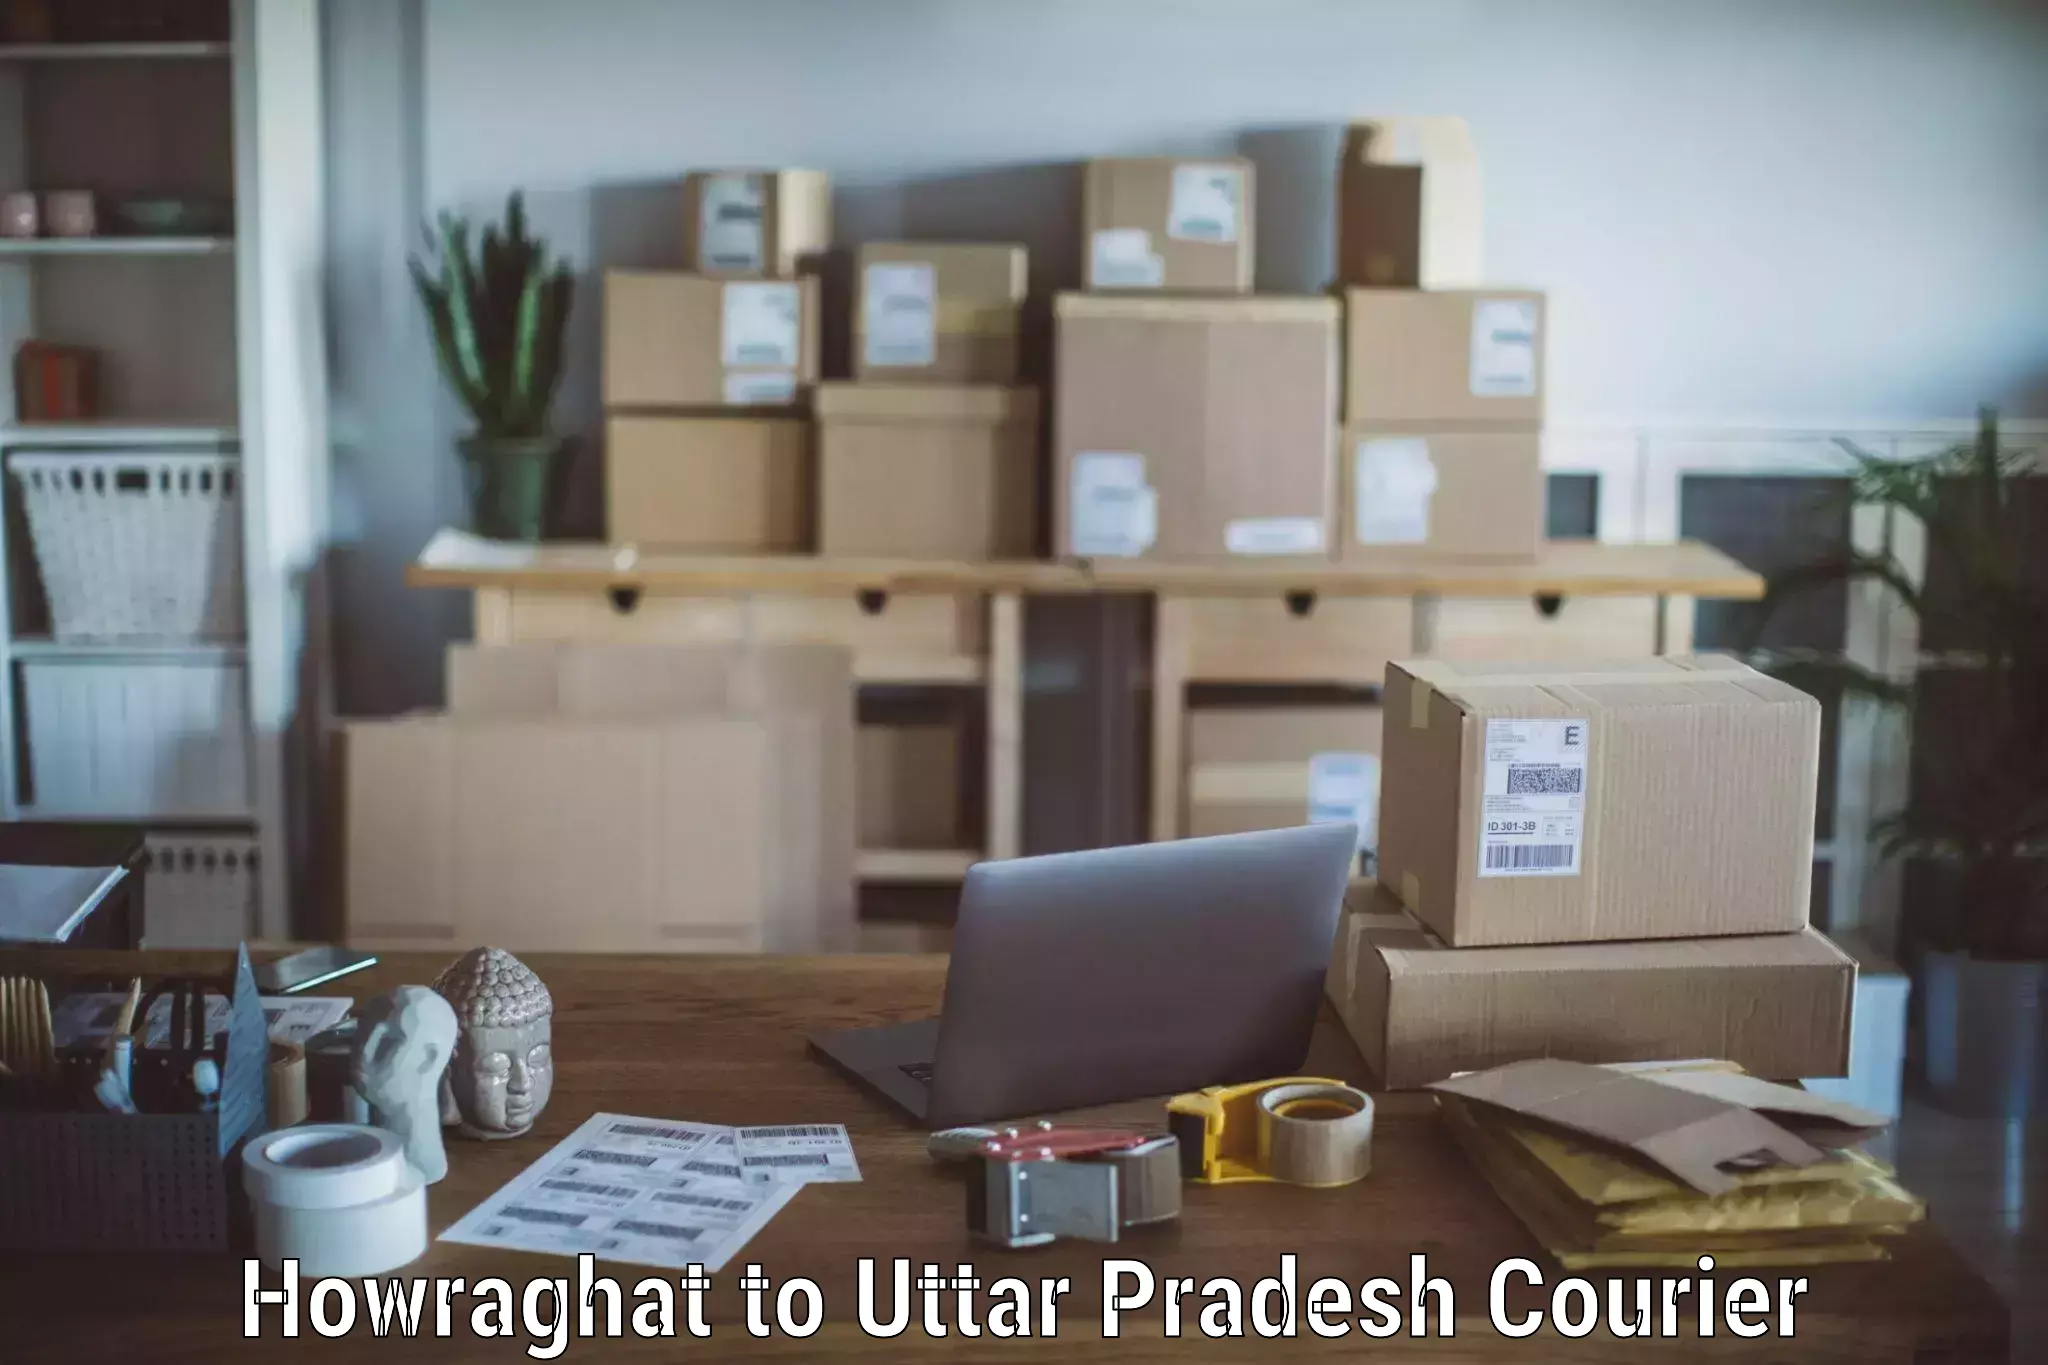 Packing and moving services Howraghat to Utraula